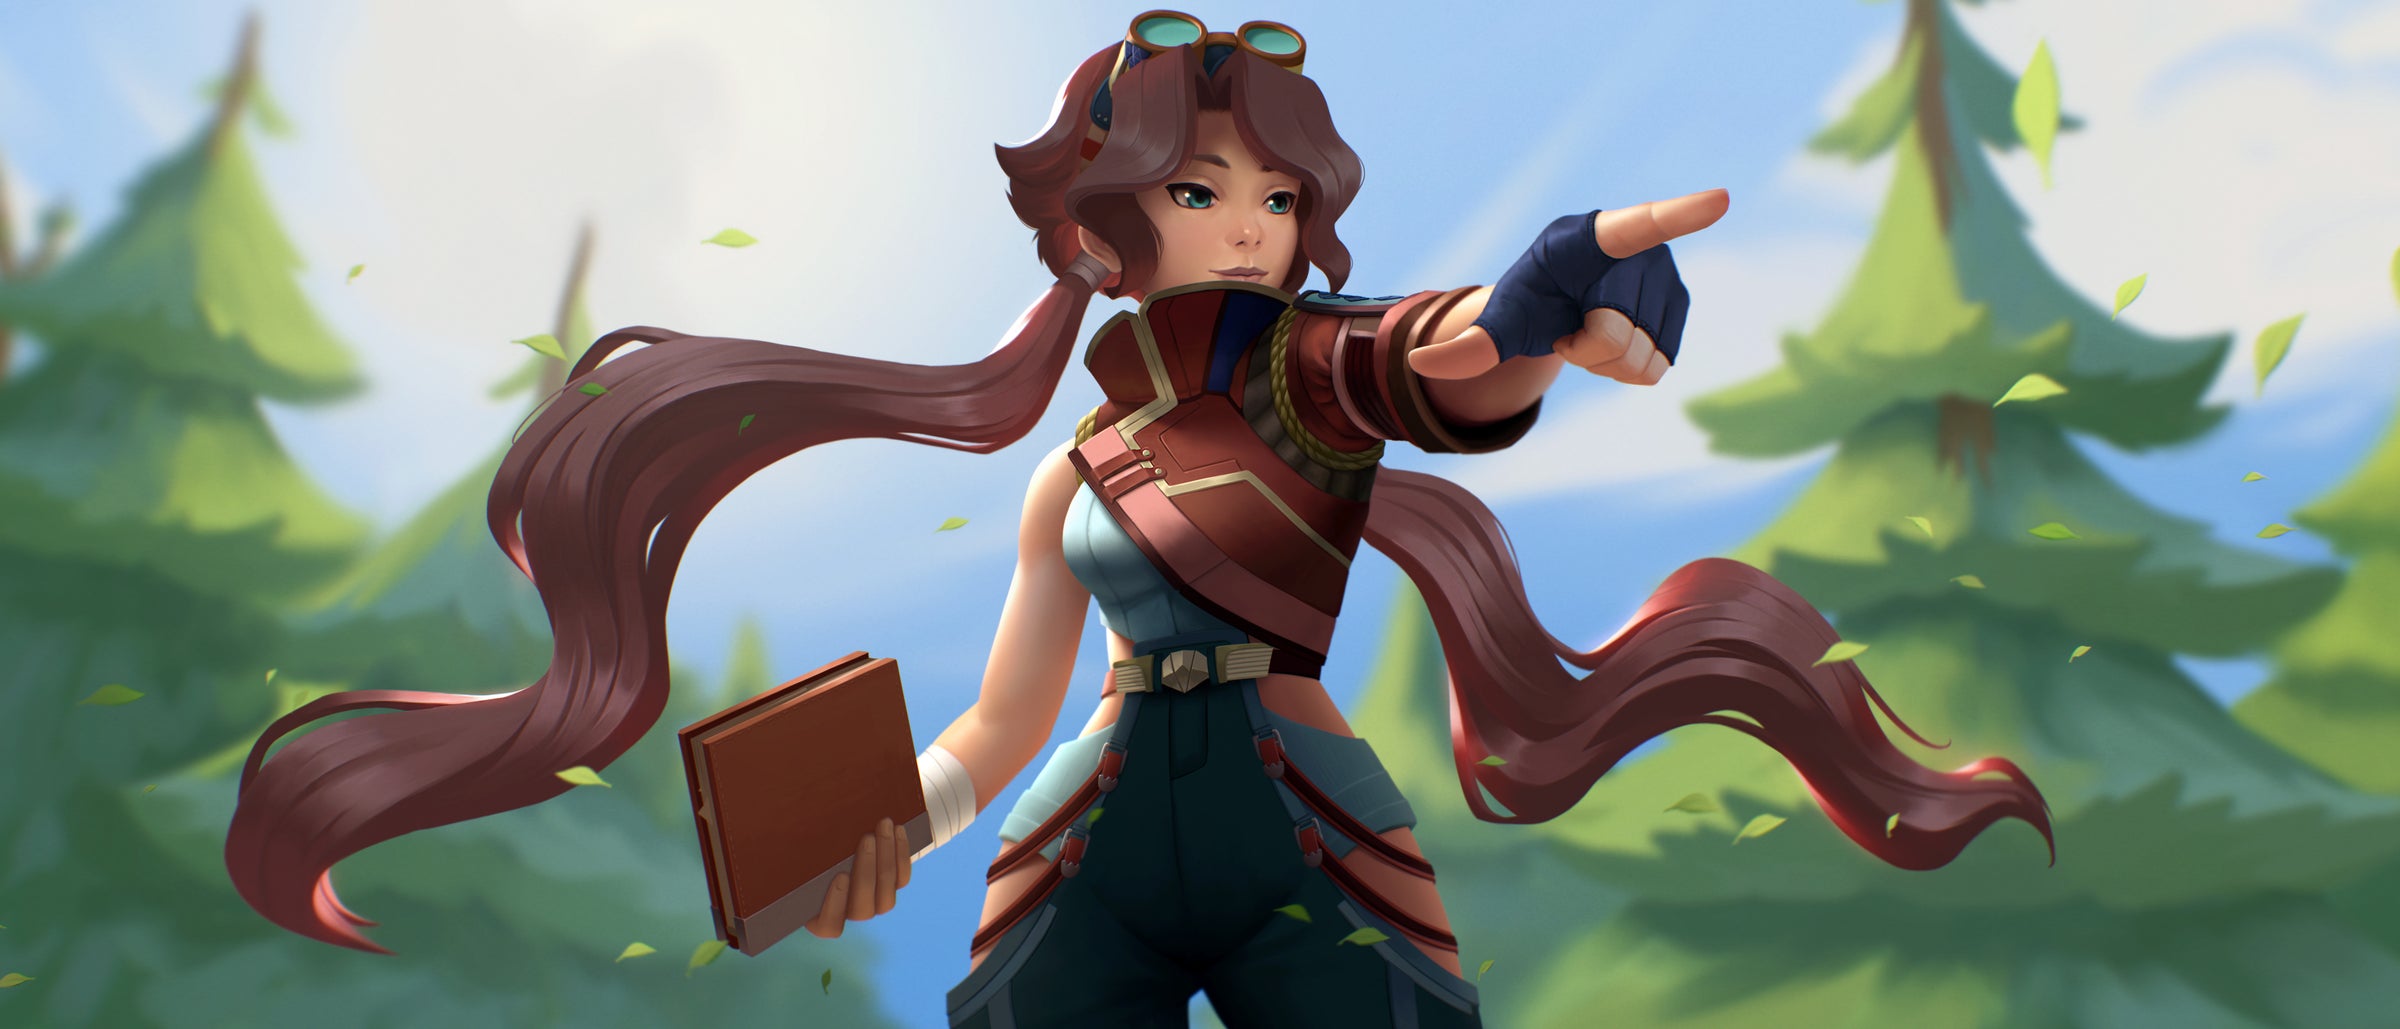 An image of the feminine conductor standing in a forest and pointing, They are holding a journal in their other hand. The image links to a twitter post, https://twitter.com/TEOTLNewAge/status/1558195555431596033.